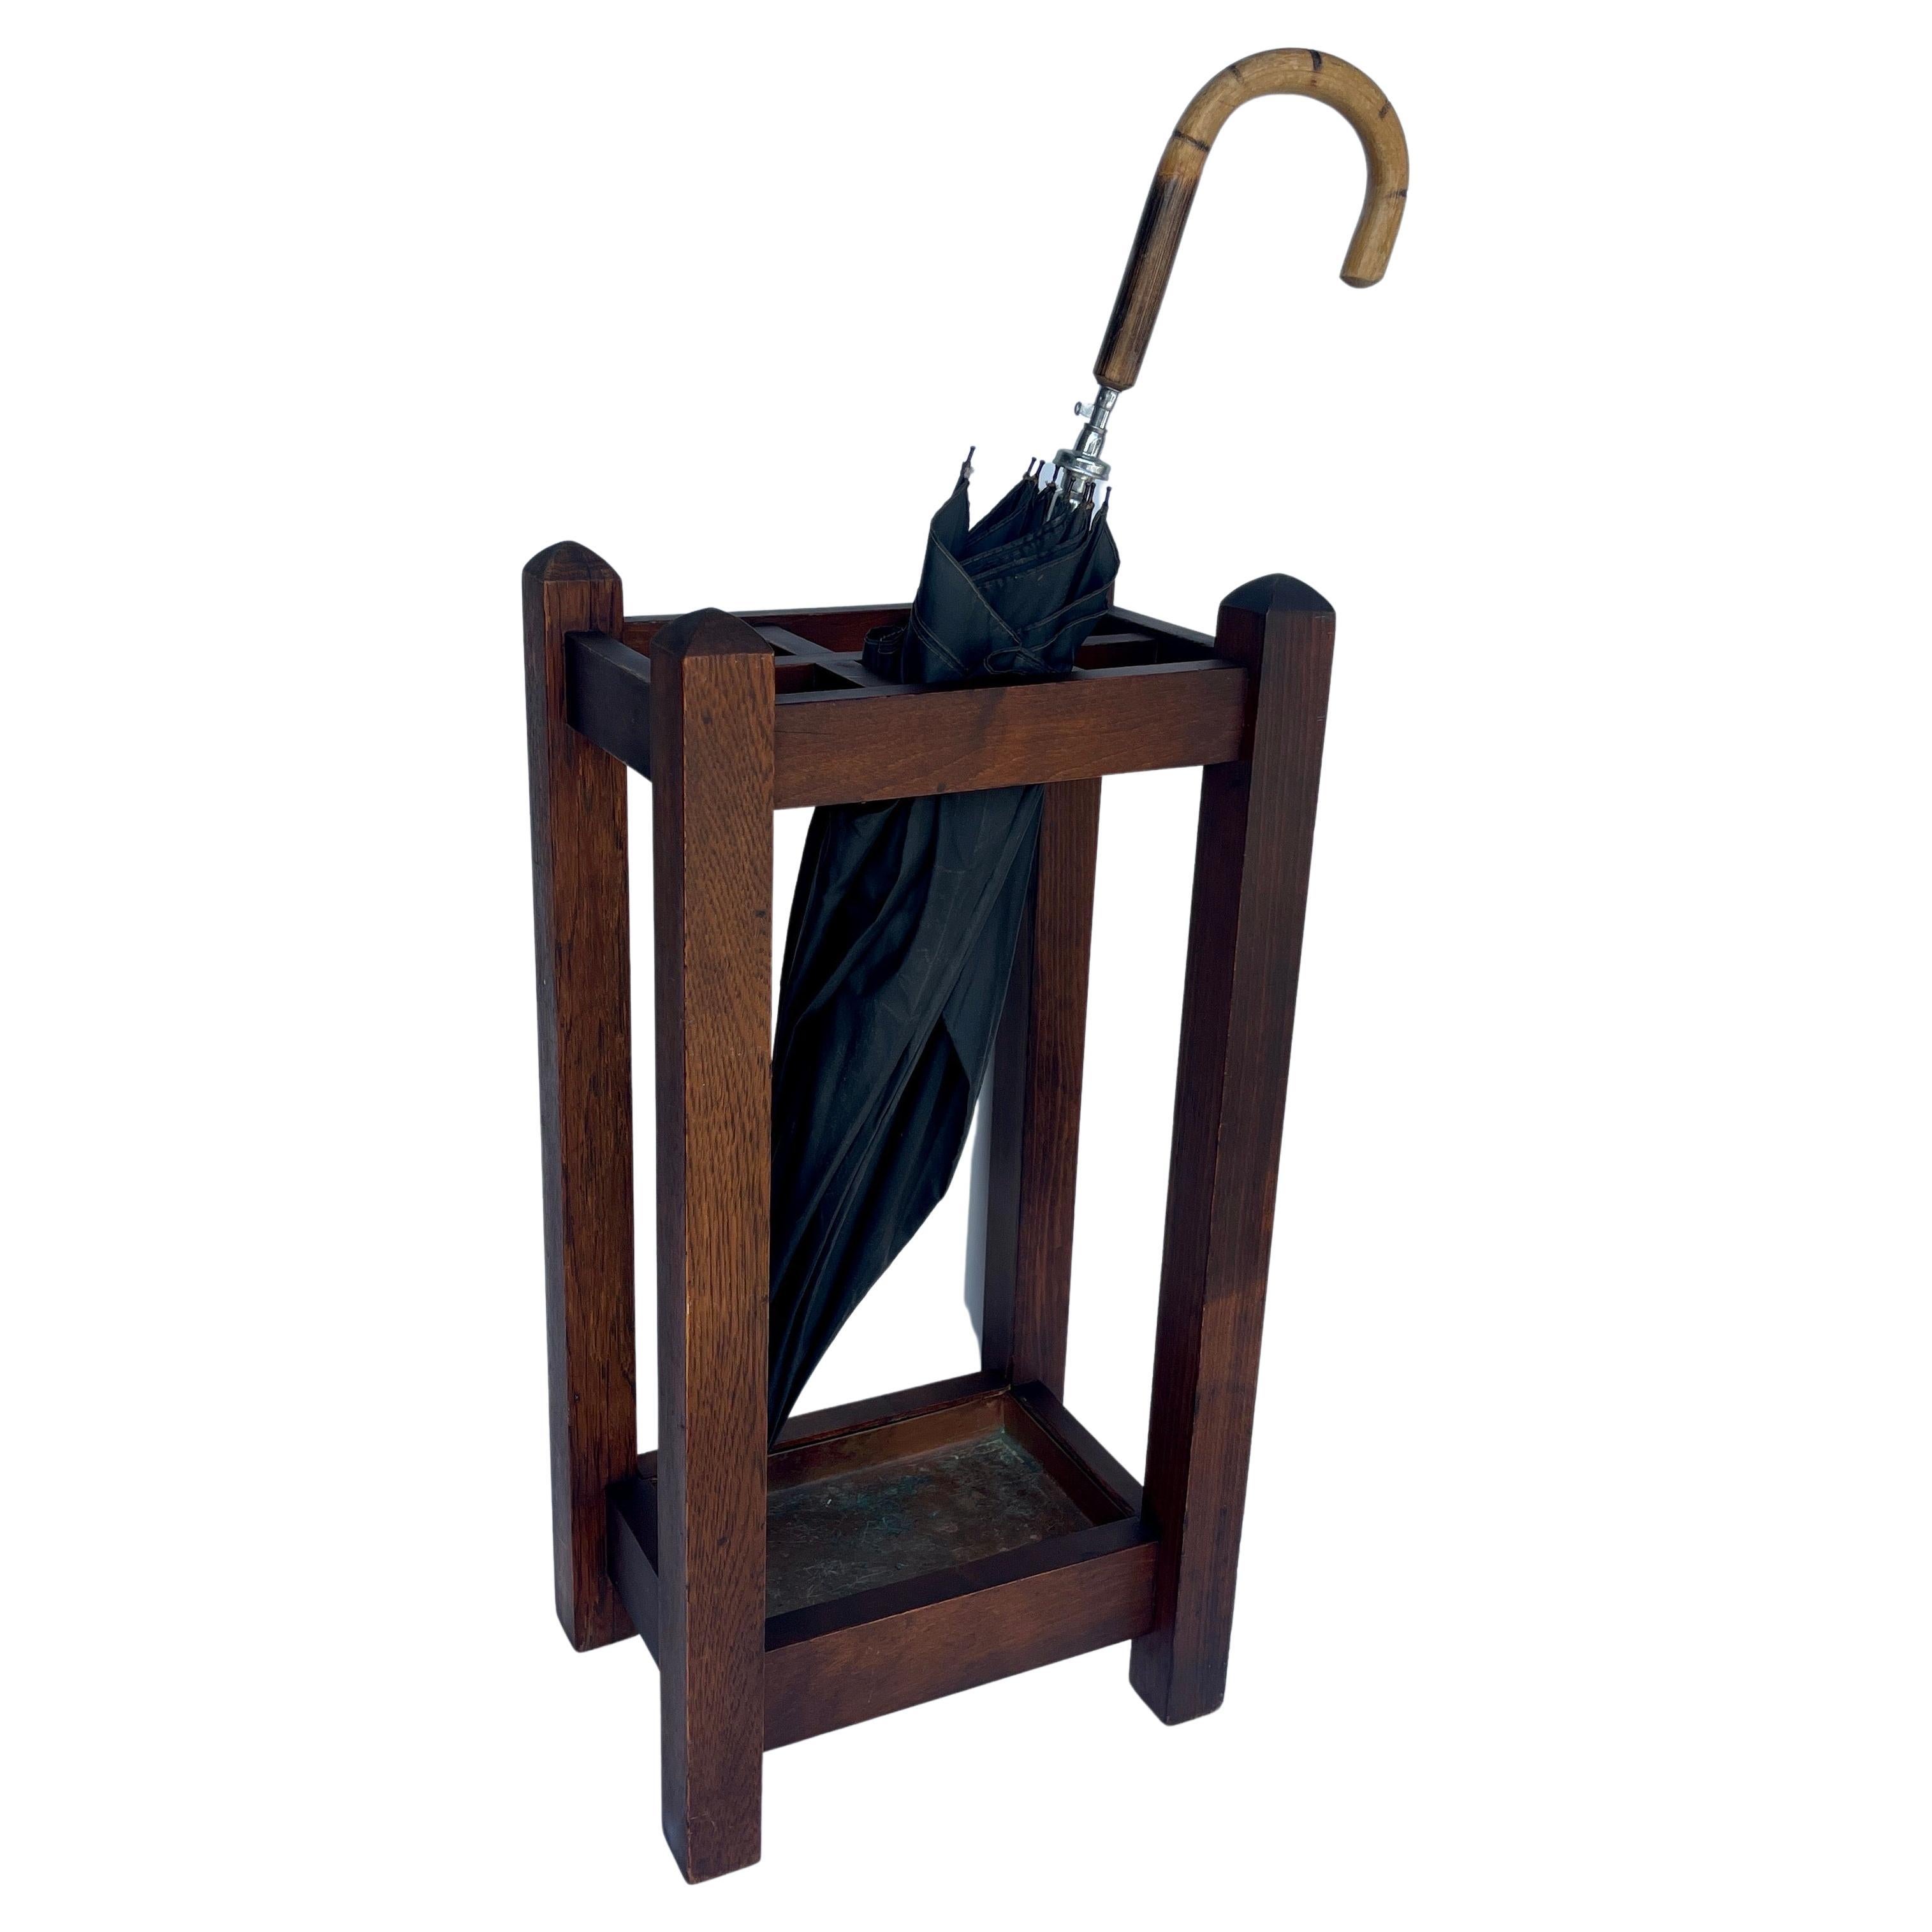 Circa 1880-1920's American Arts and Crafts Oak Umbrella Cane Stand 

Beautiful Arts and Crafts wood umbrella/cane stand with six dividers from the late 1880-1920's. The oak stand features a solid wood base with a copper metal piece at the bottom.